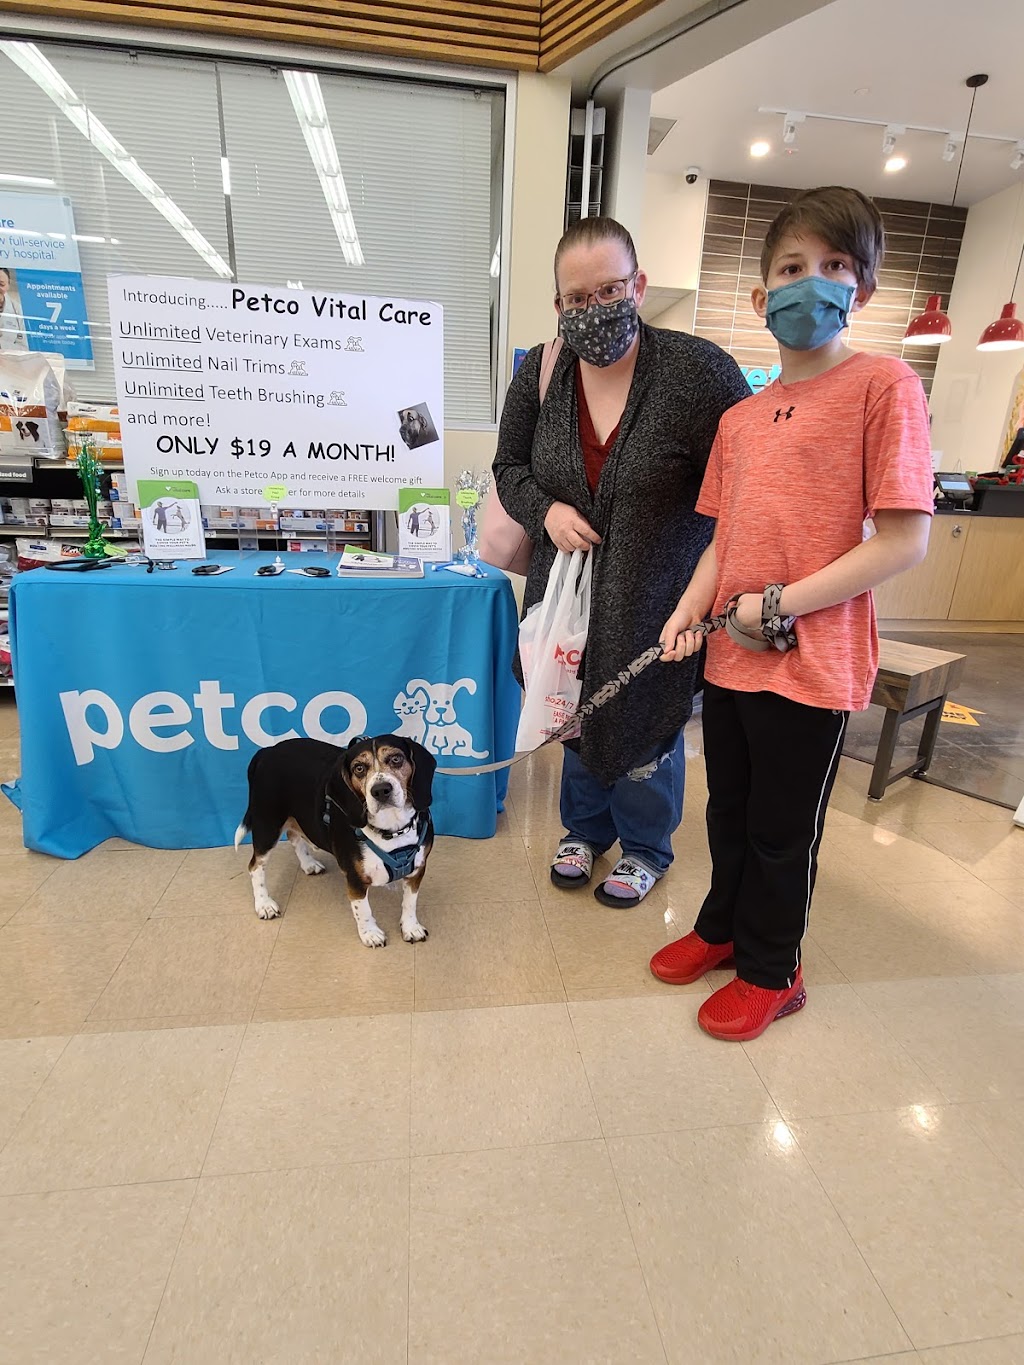 Vetco Total Care | 1670 24th Ave NW, Norman, OK 73069, USA | Phone: (405) 292-4118